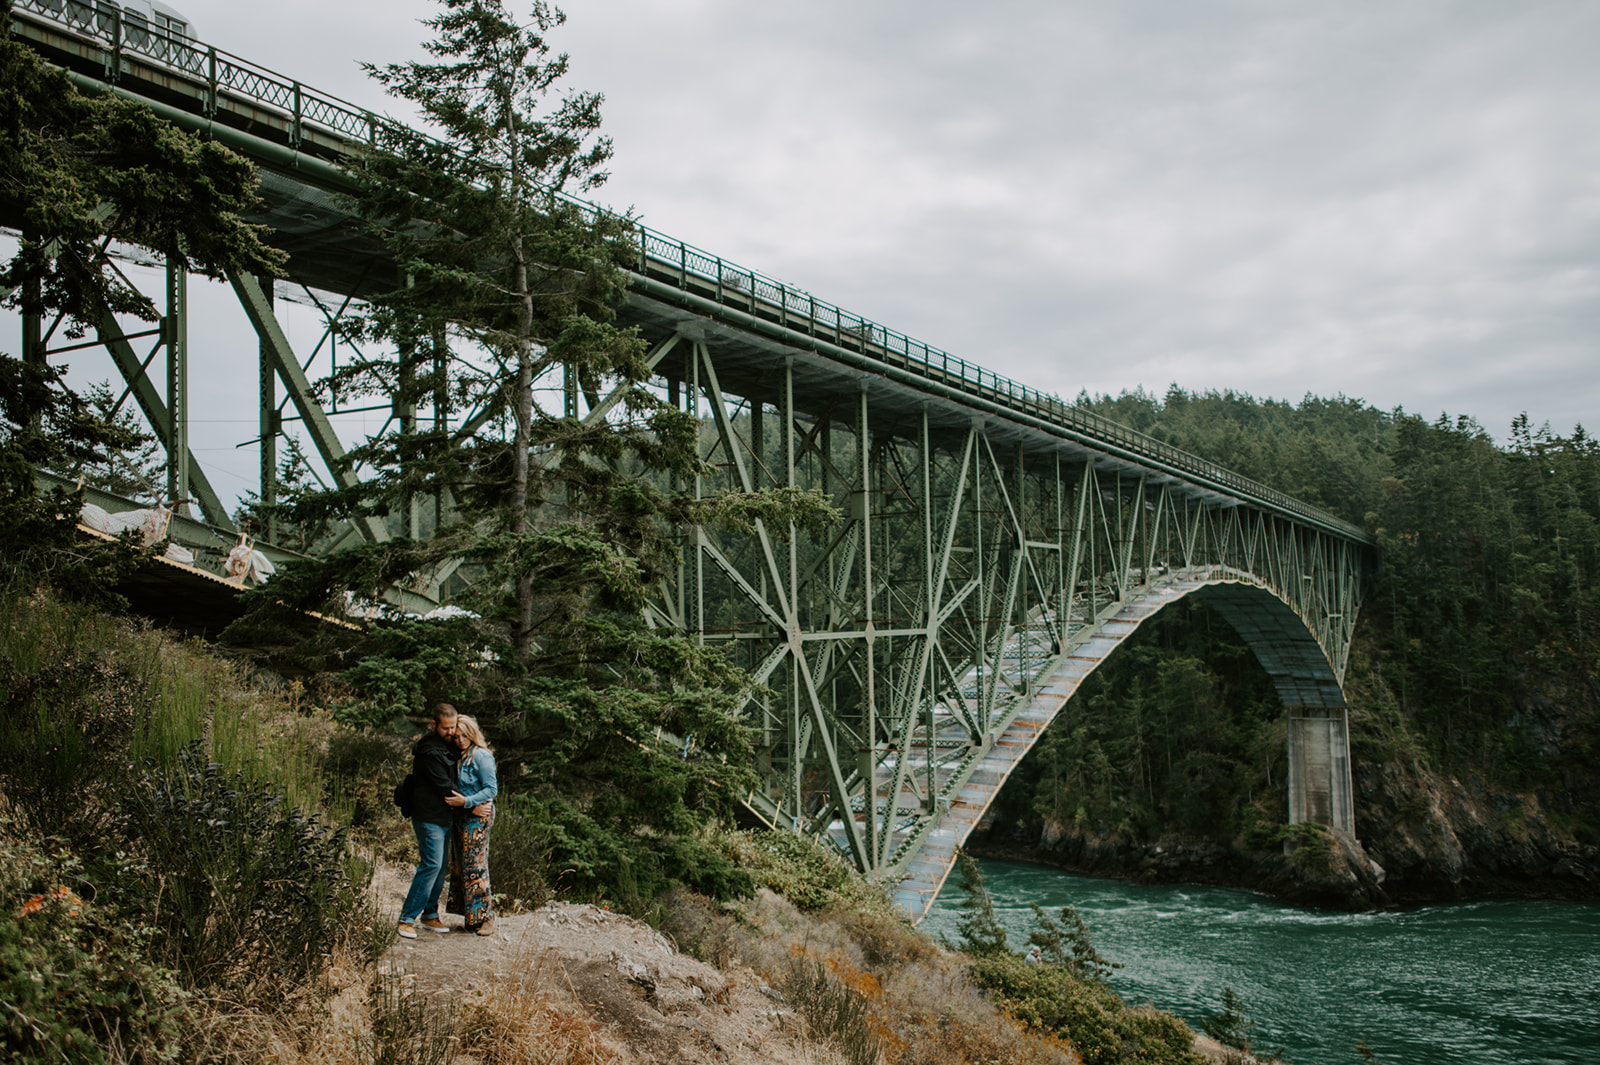 A scenic engagement photo of a couple standing near the Deception Pass Bridge, surrounded by lush greenery and overlooking the water below.